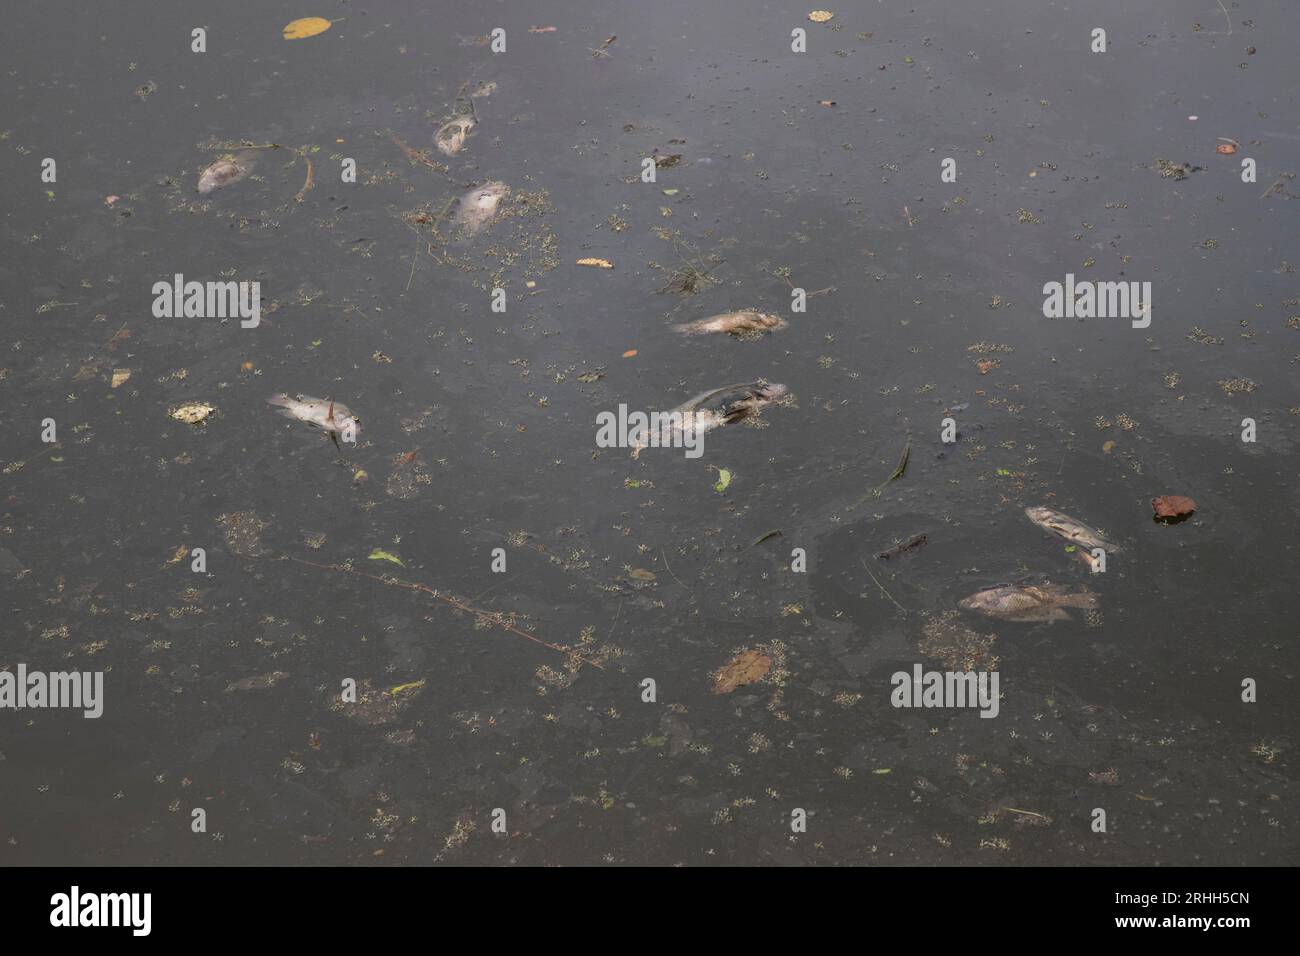 Dead fish floating in a pond which has been polluted with plastic waste and chemicals in old Dhaka, Bangladesh Stock Photo